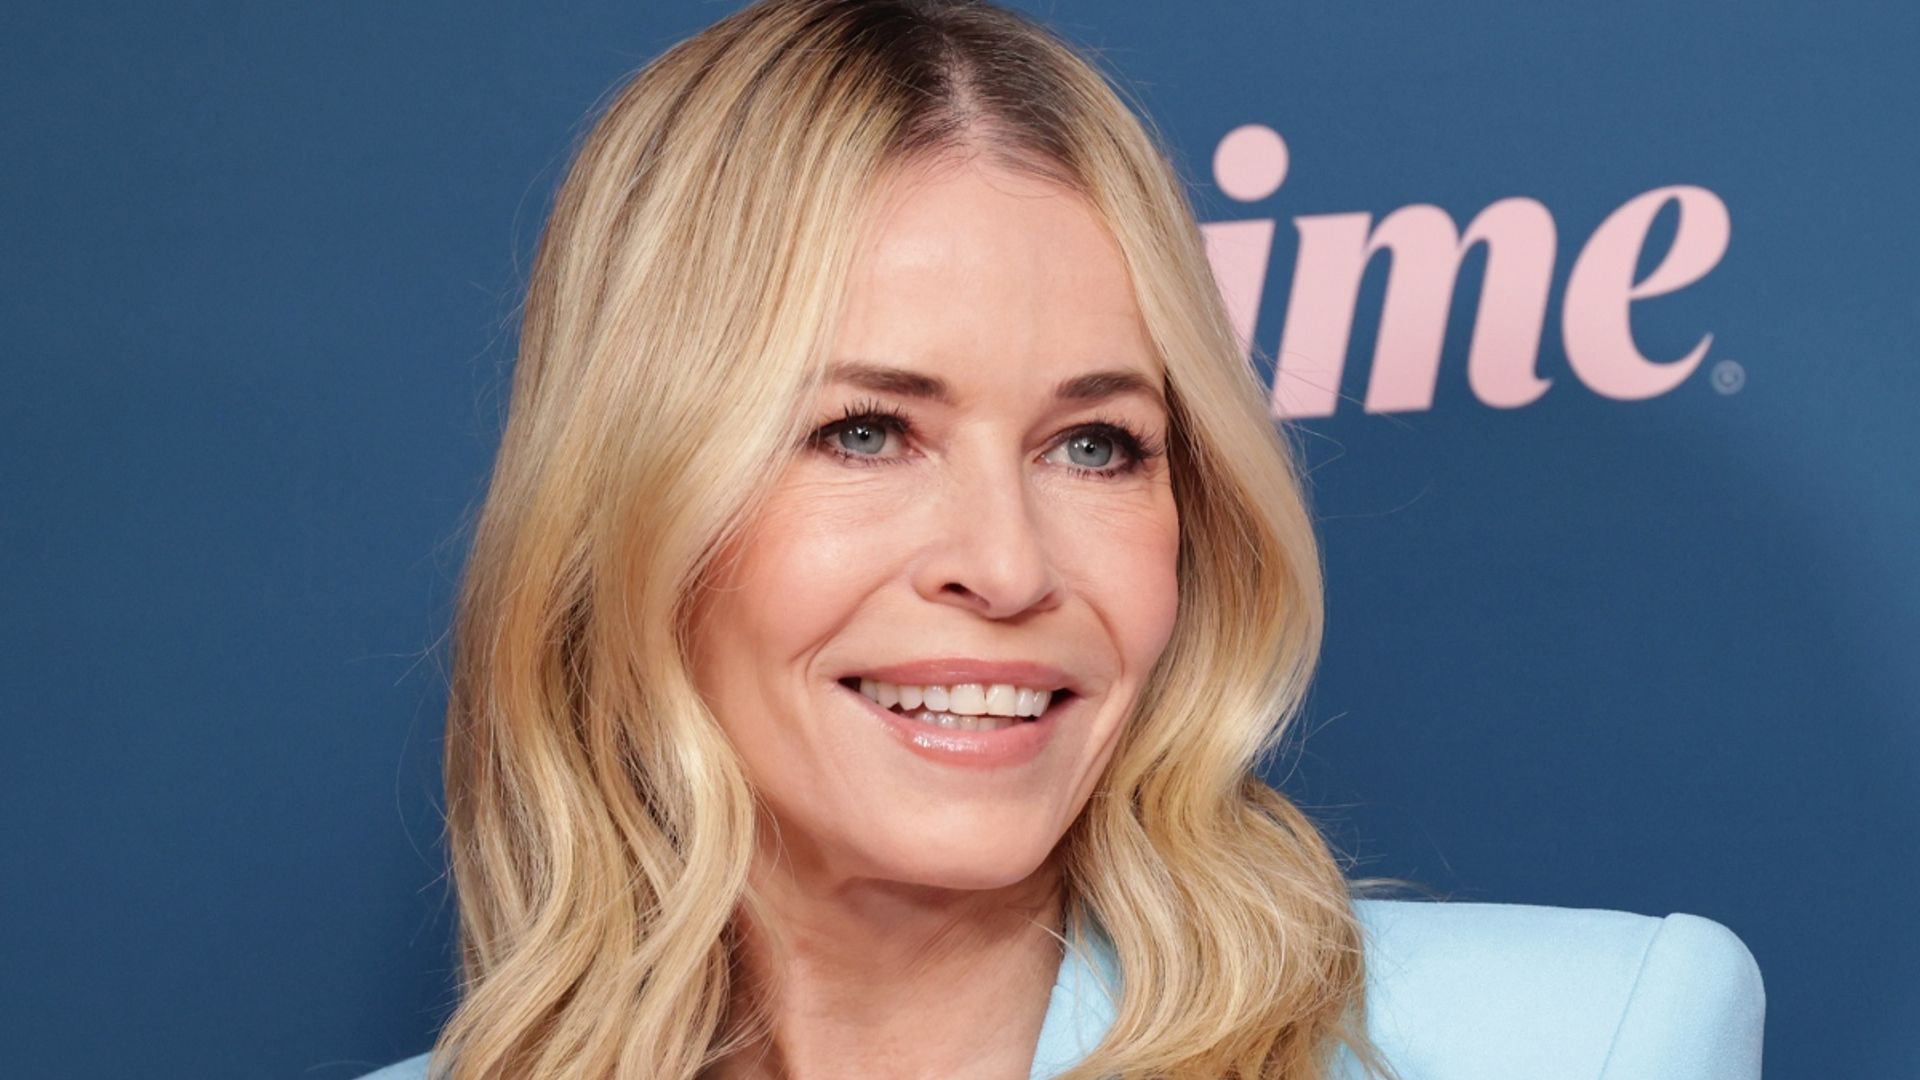 All you need to know about Critics Choice Awards host Chelsea Handler